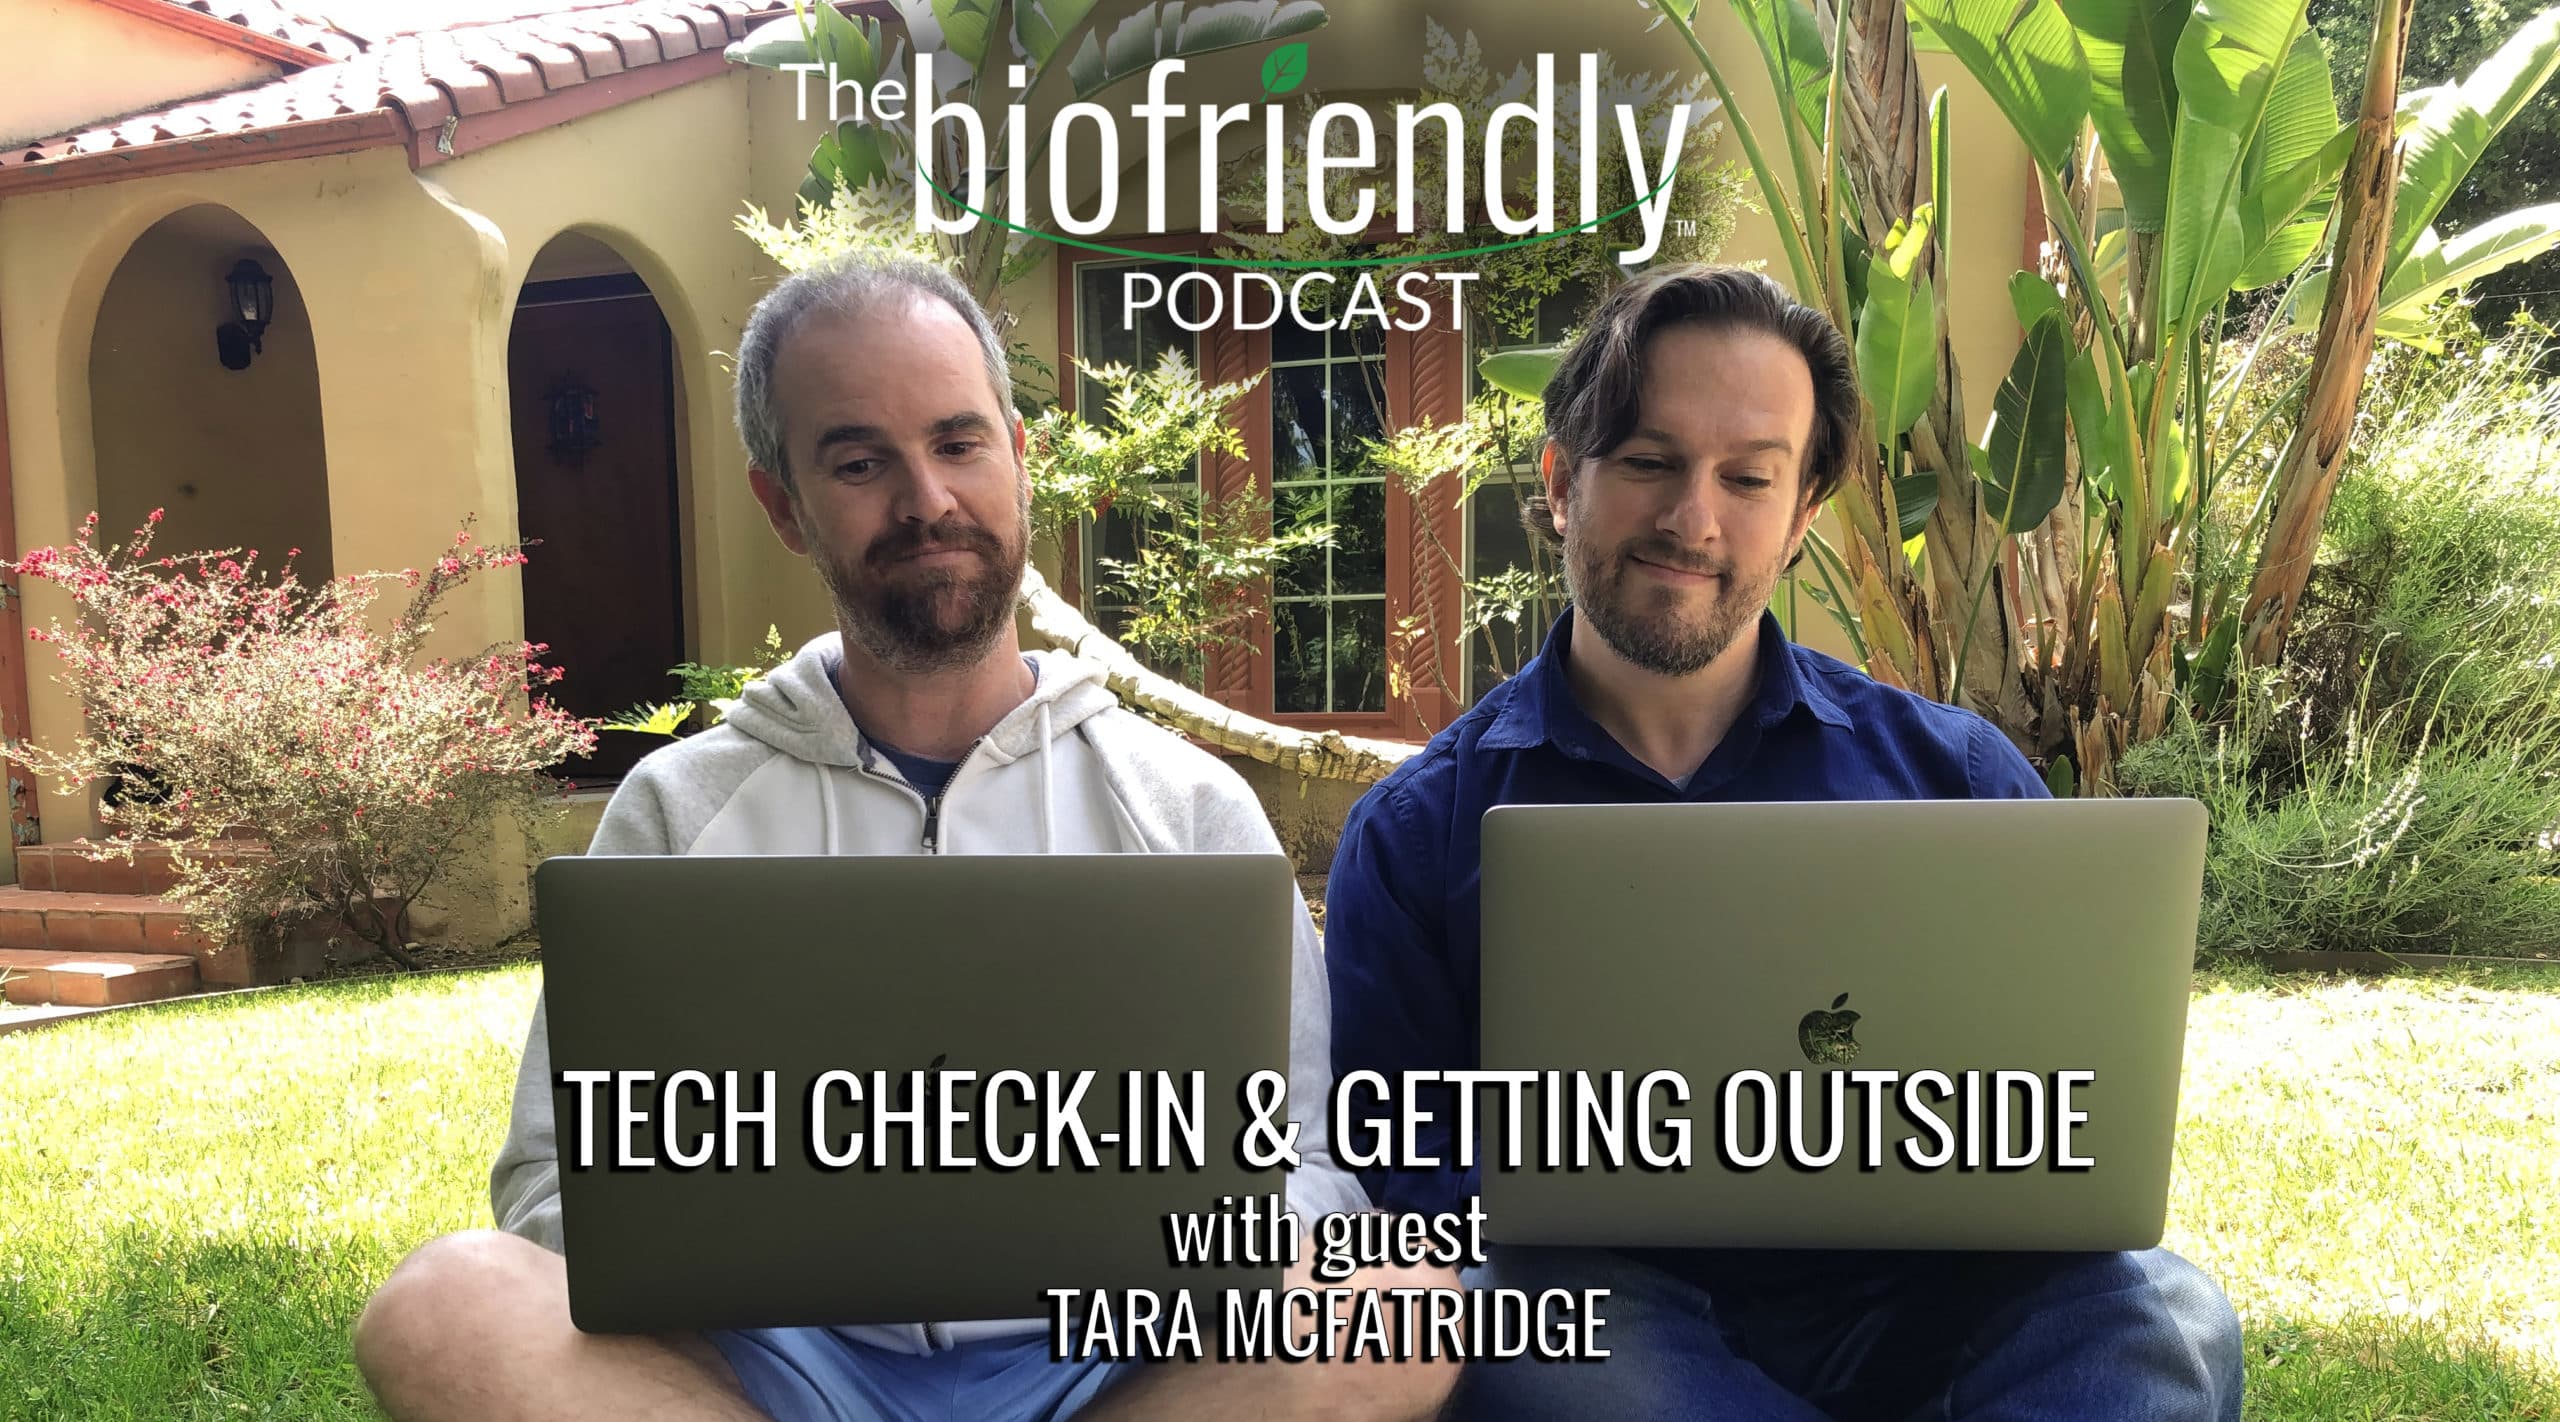 The Biofriendly Podcast - Episode 11 - Tech Check-In And Getting Outside with guest Tara McFatridge